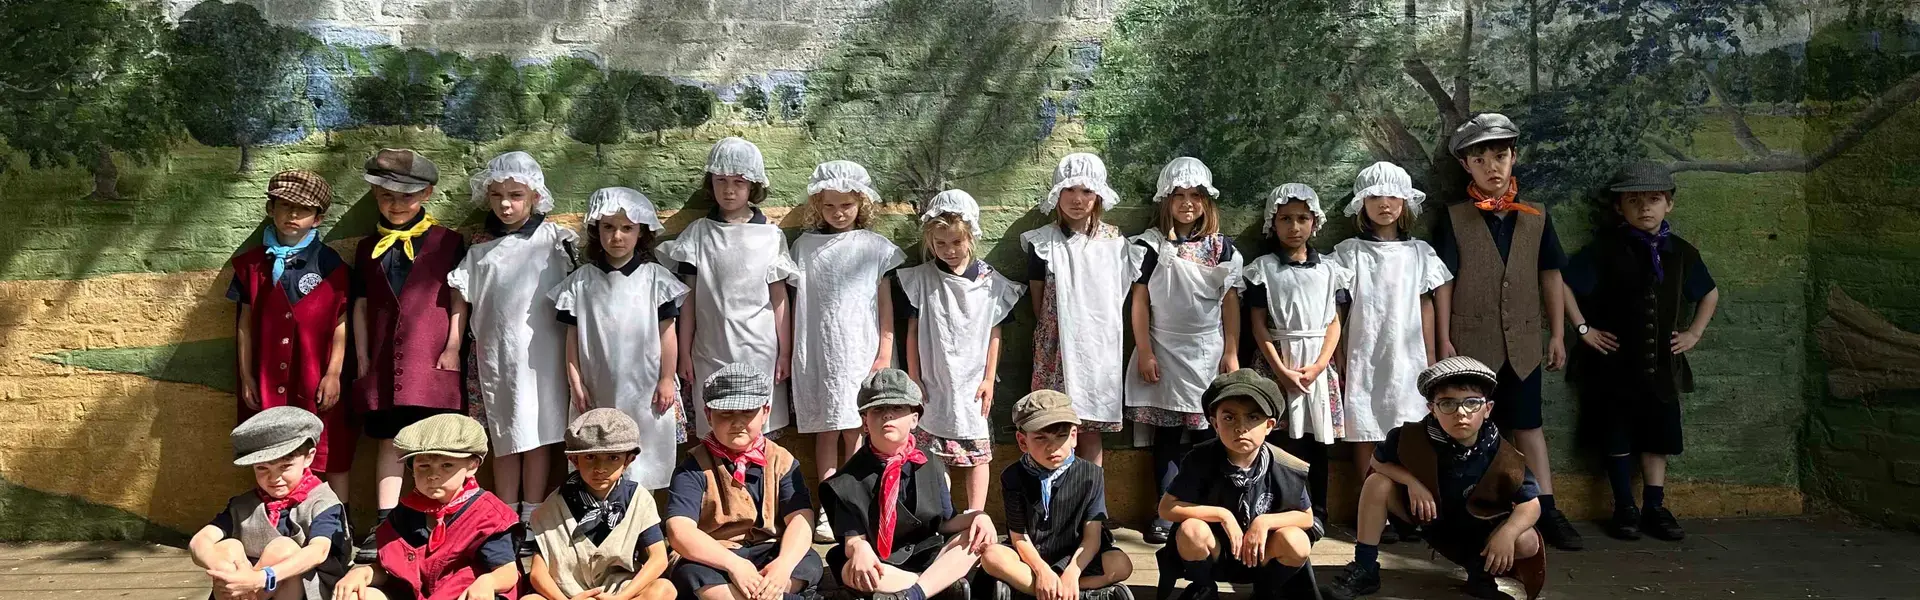 Group photo of Prep 1 at Holly Lodge | Ibstock Place School, a private school near Richmond, Barnes, Putney, Kingston, and Wandsworth on an overseas trip. 